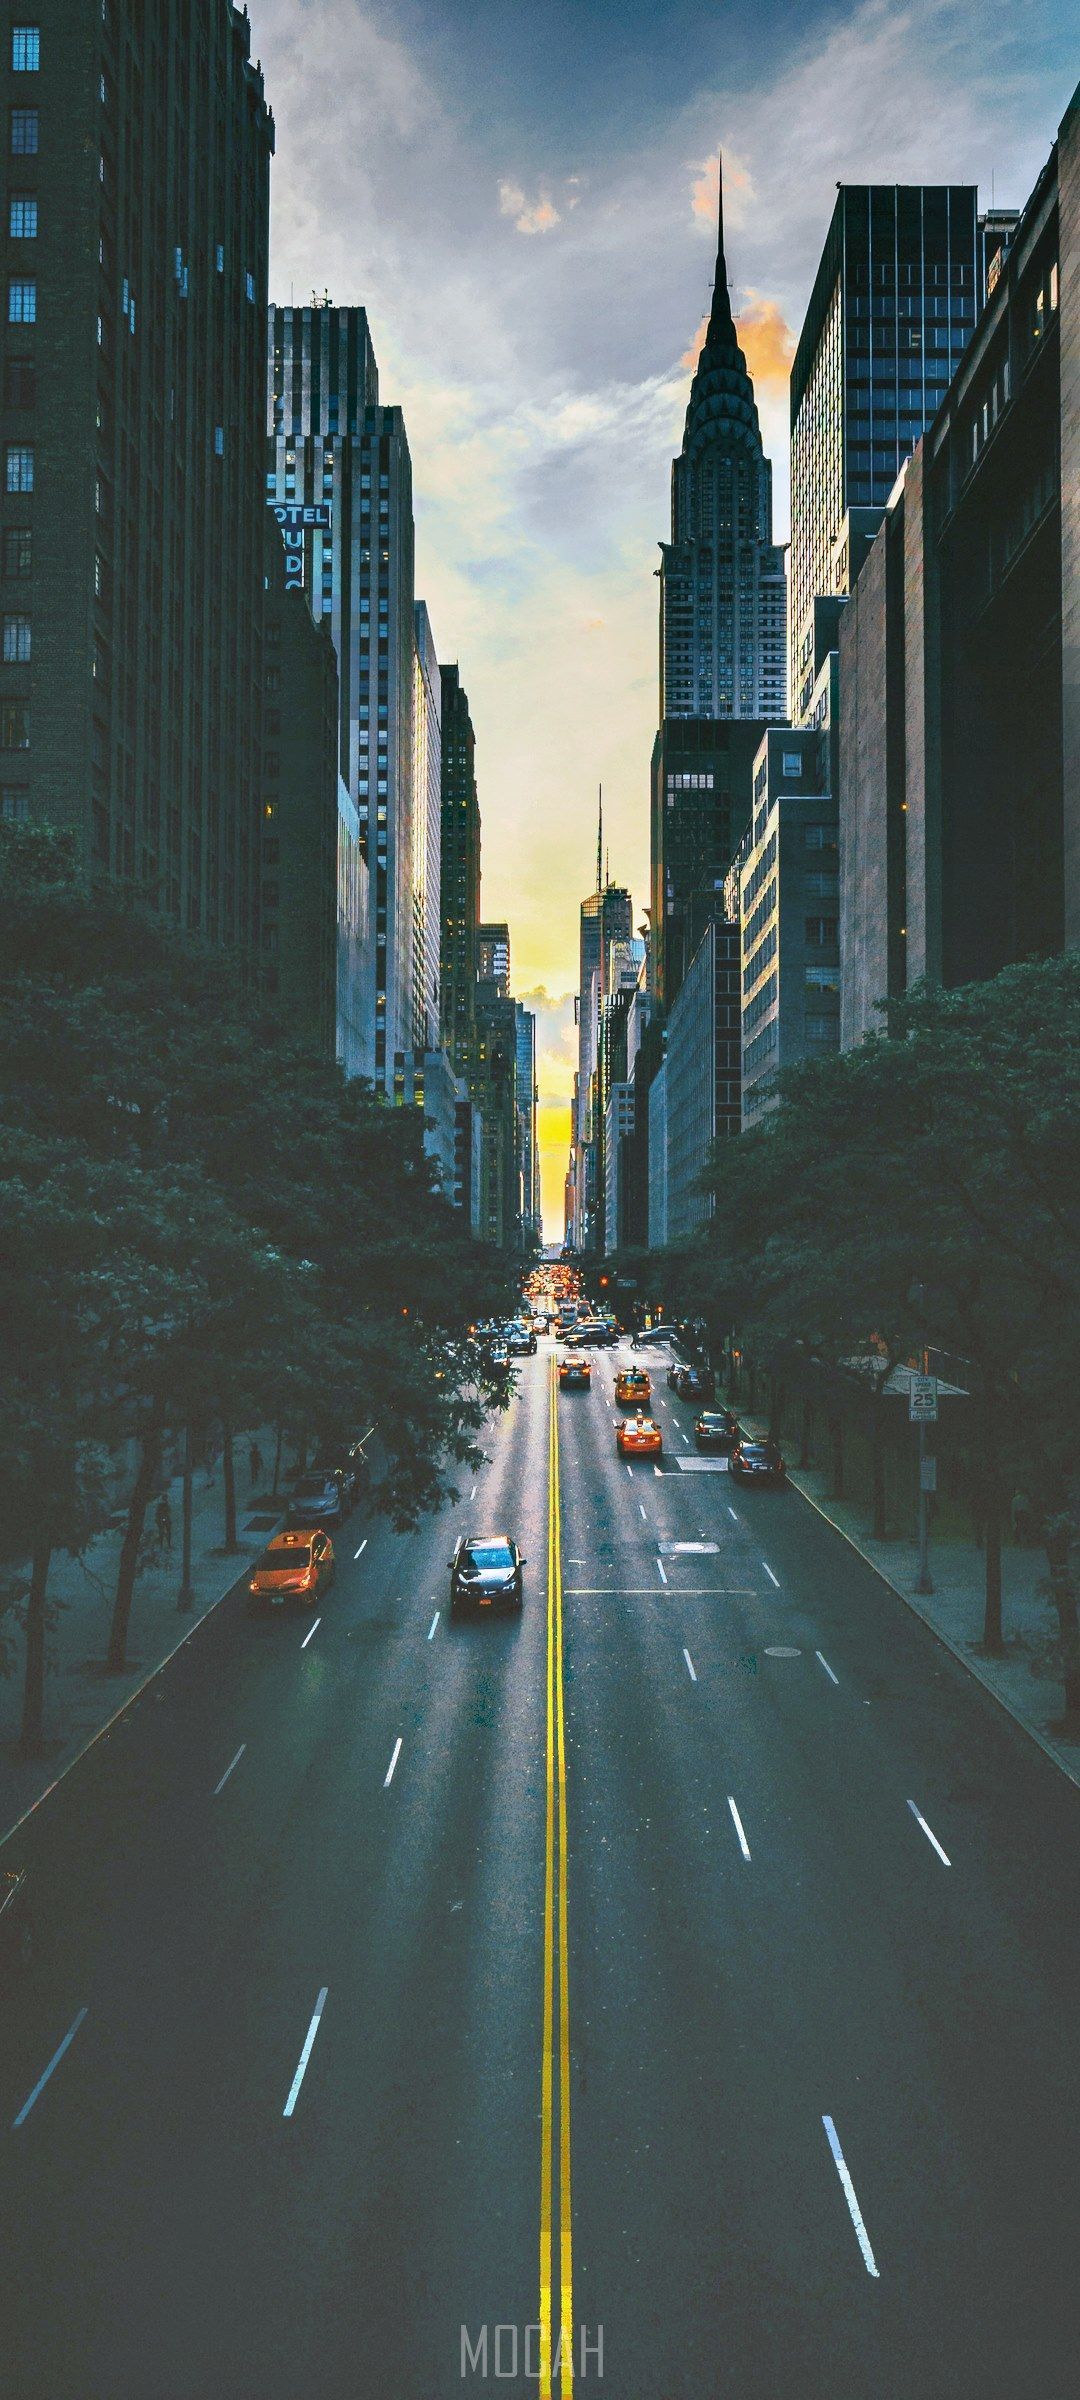 IPhone wallpaper of a city street with skyscrapers - 1080x2400